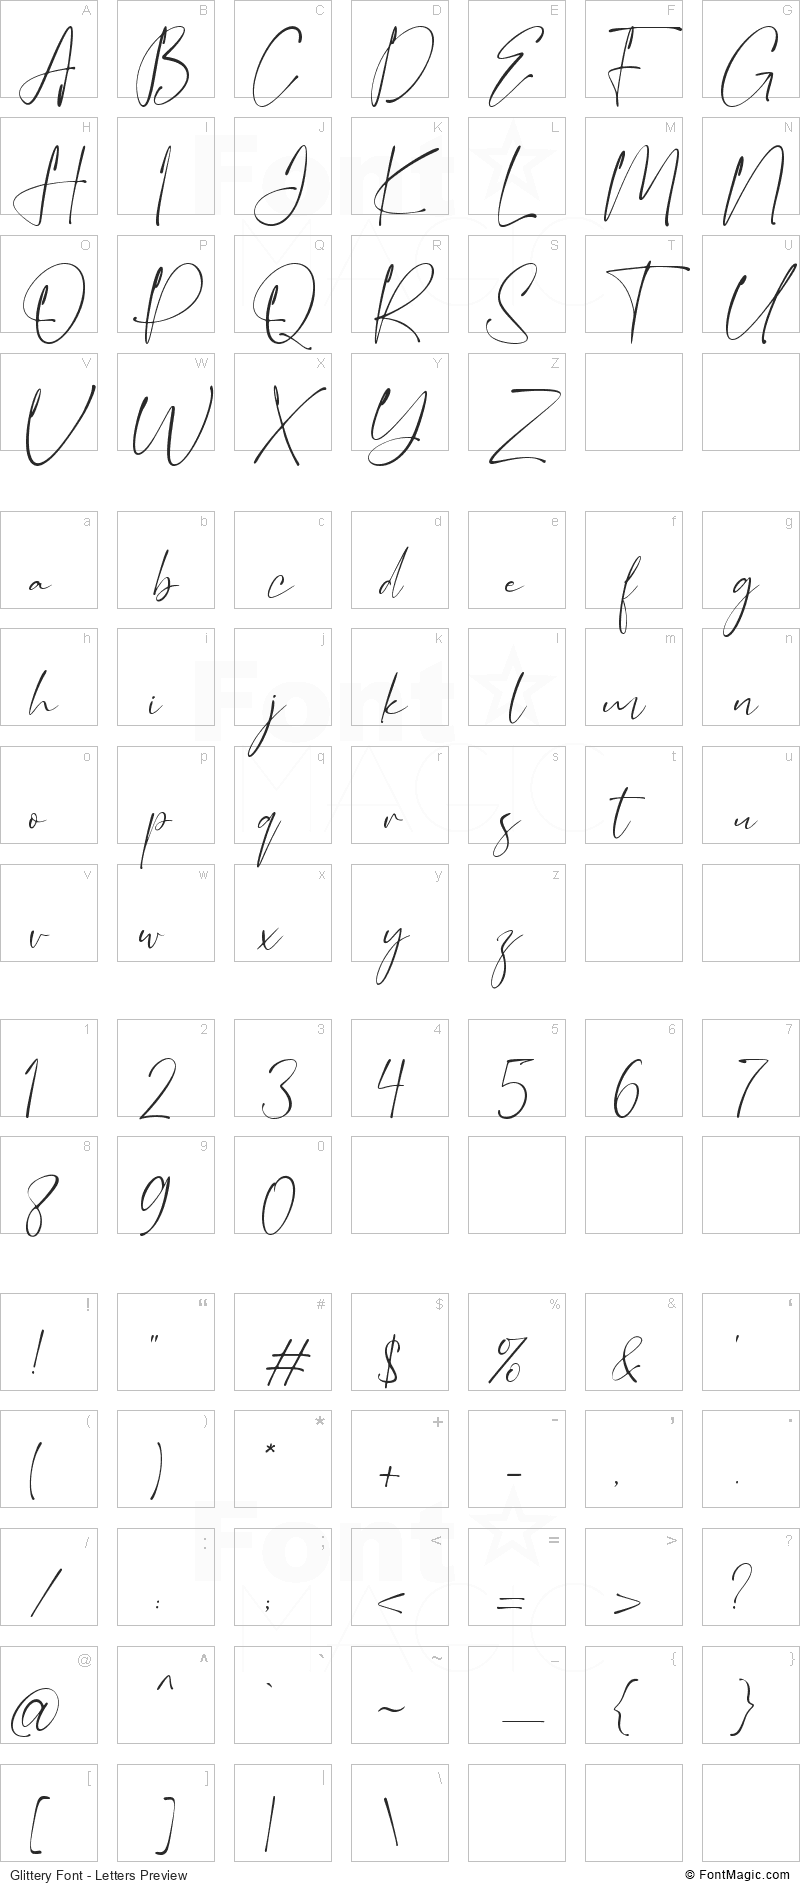 Glittery Font - All Latters Preview Chart